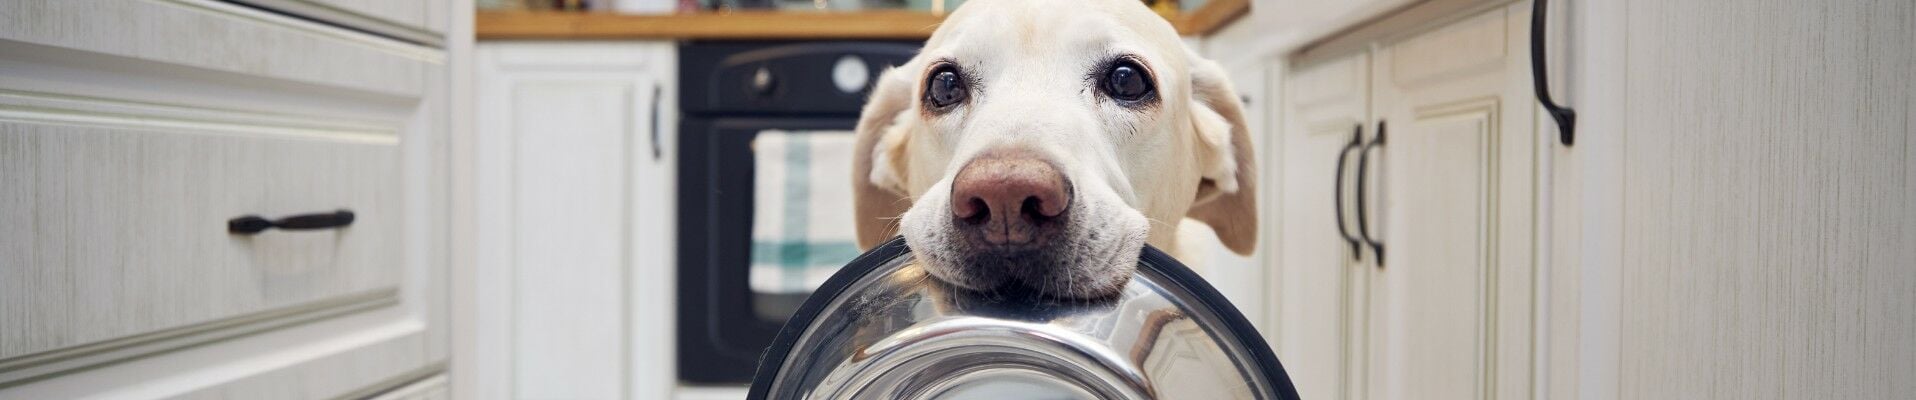 A yellow lab holding its empty food bowl in its mouth